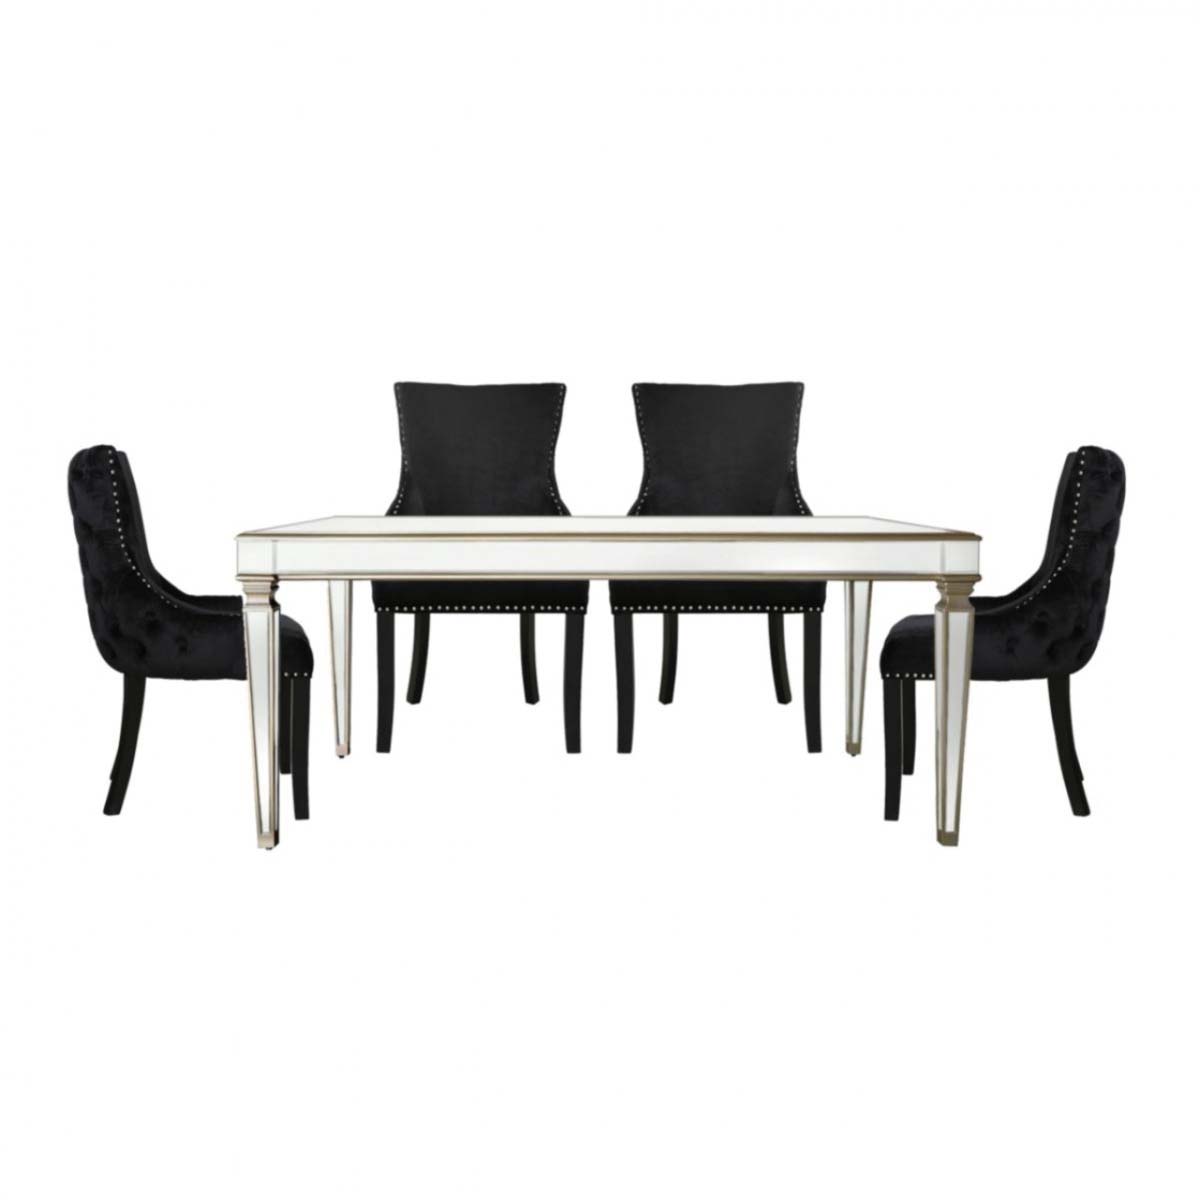 Andreas Champagne Trim Mirrored 5 Piece Set - Black Chairs